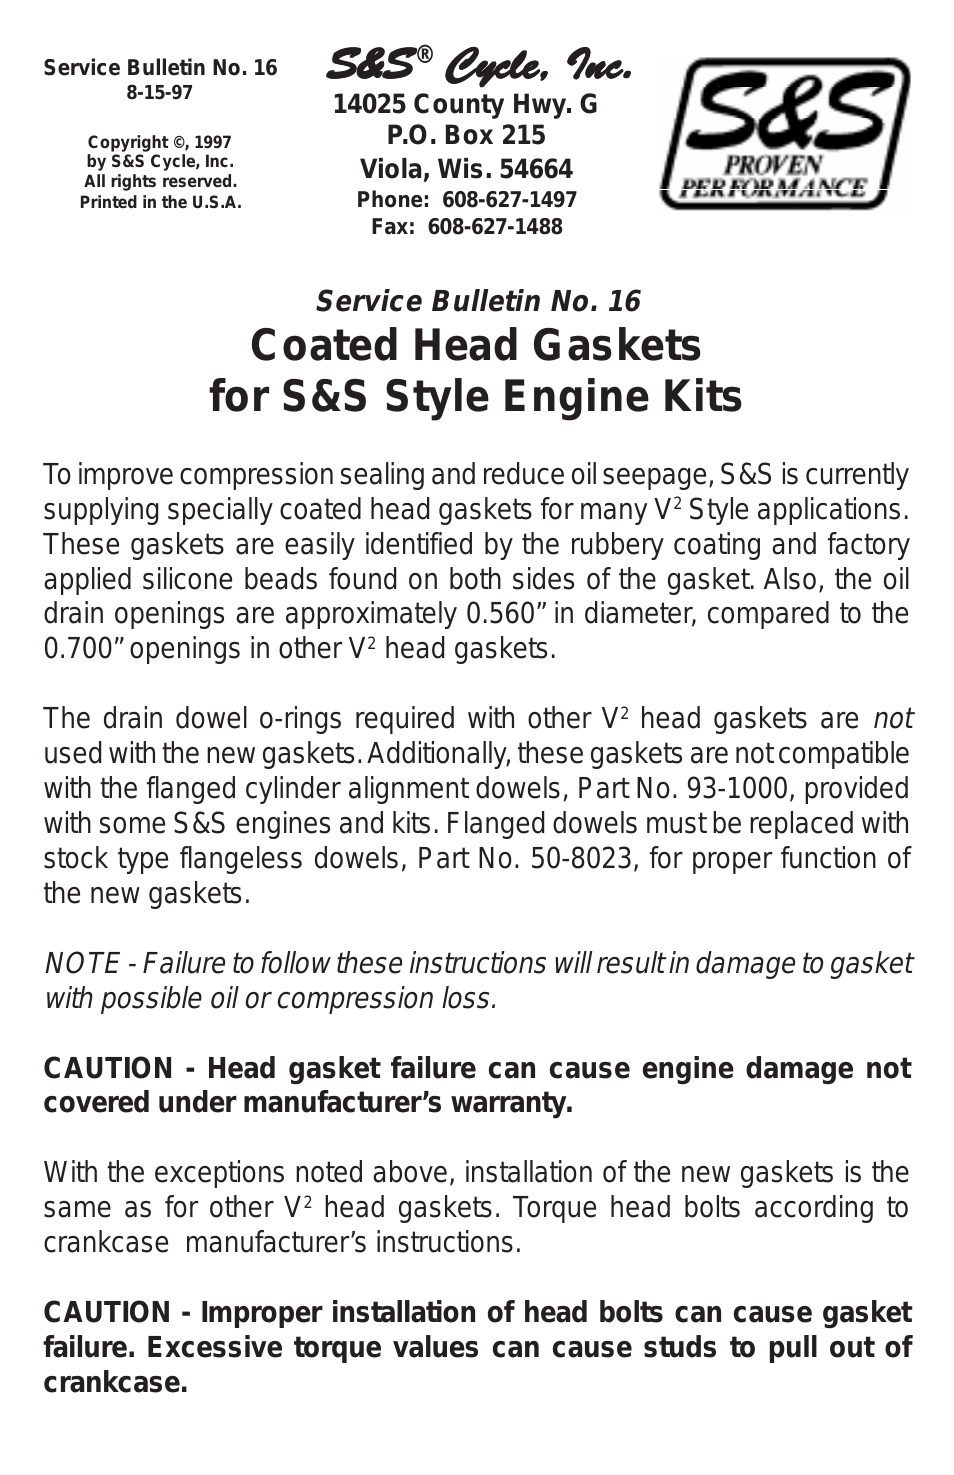 Coated Head Gaskets for S&S Style Engine Kits